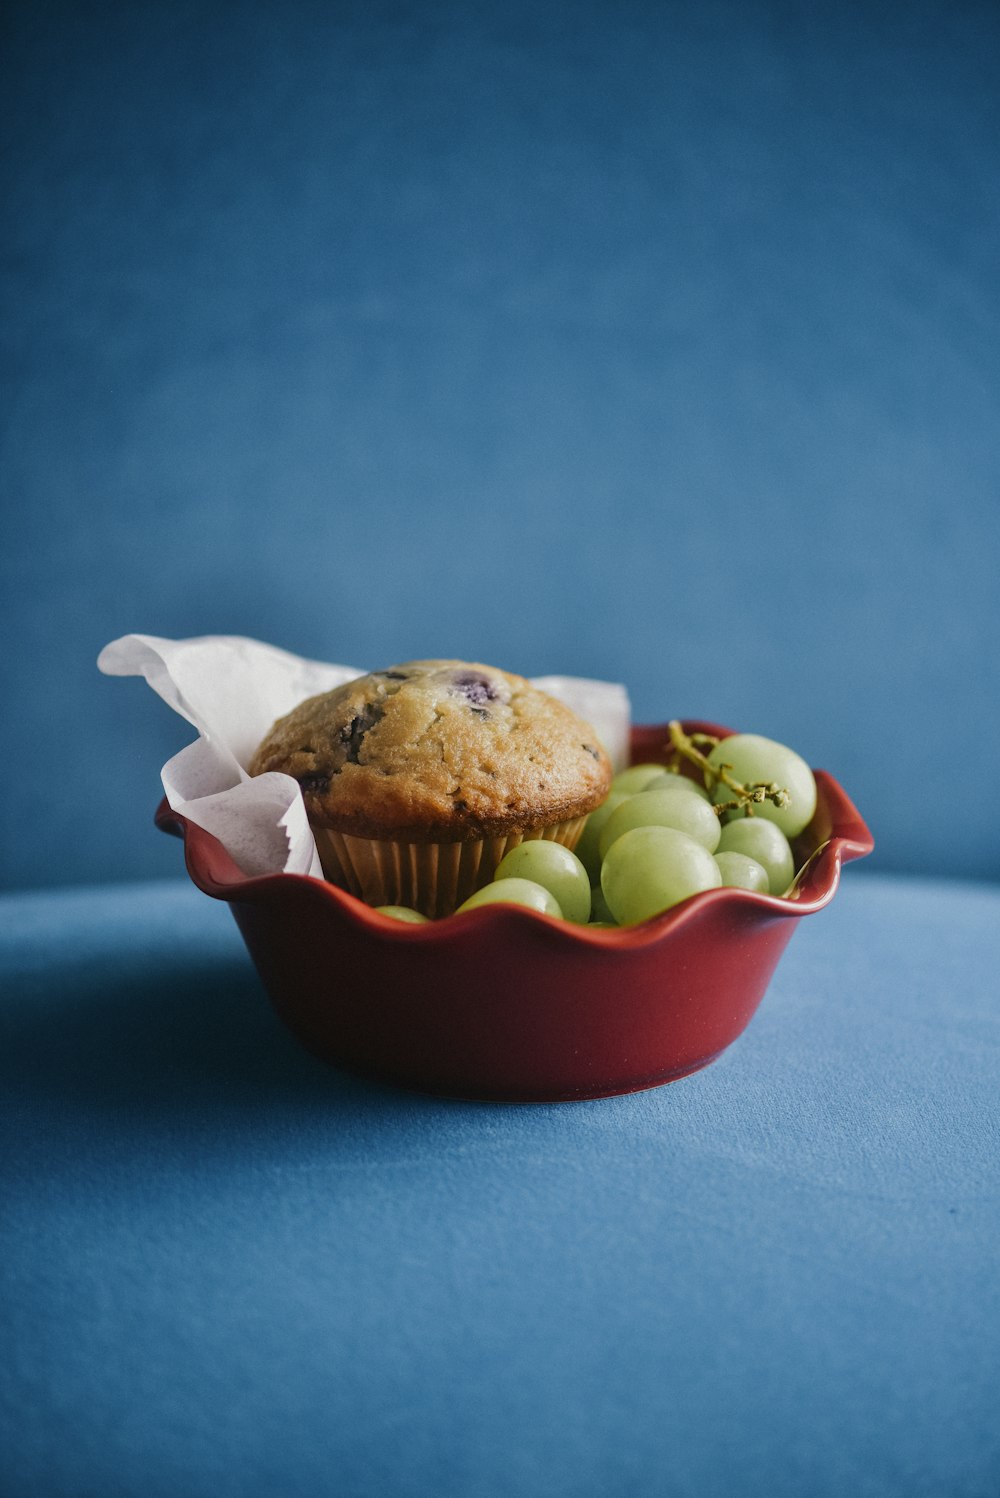 a muffin in a red bowl filled with fruit